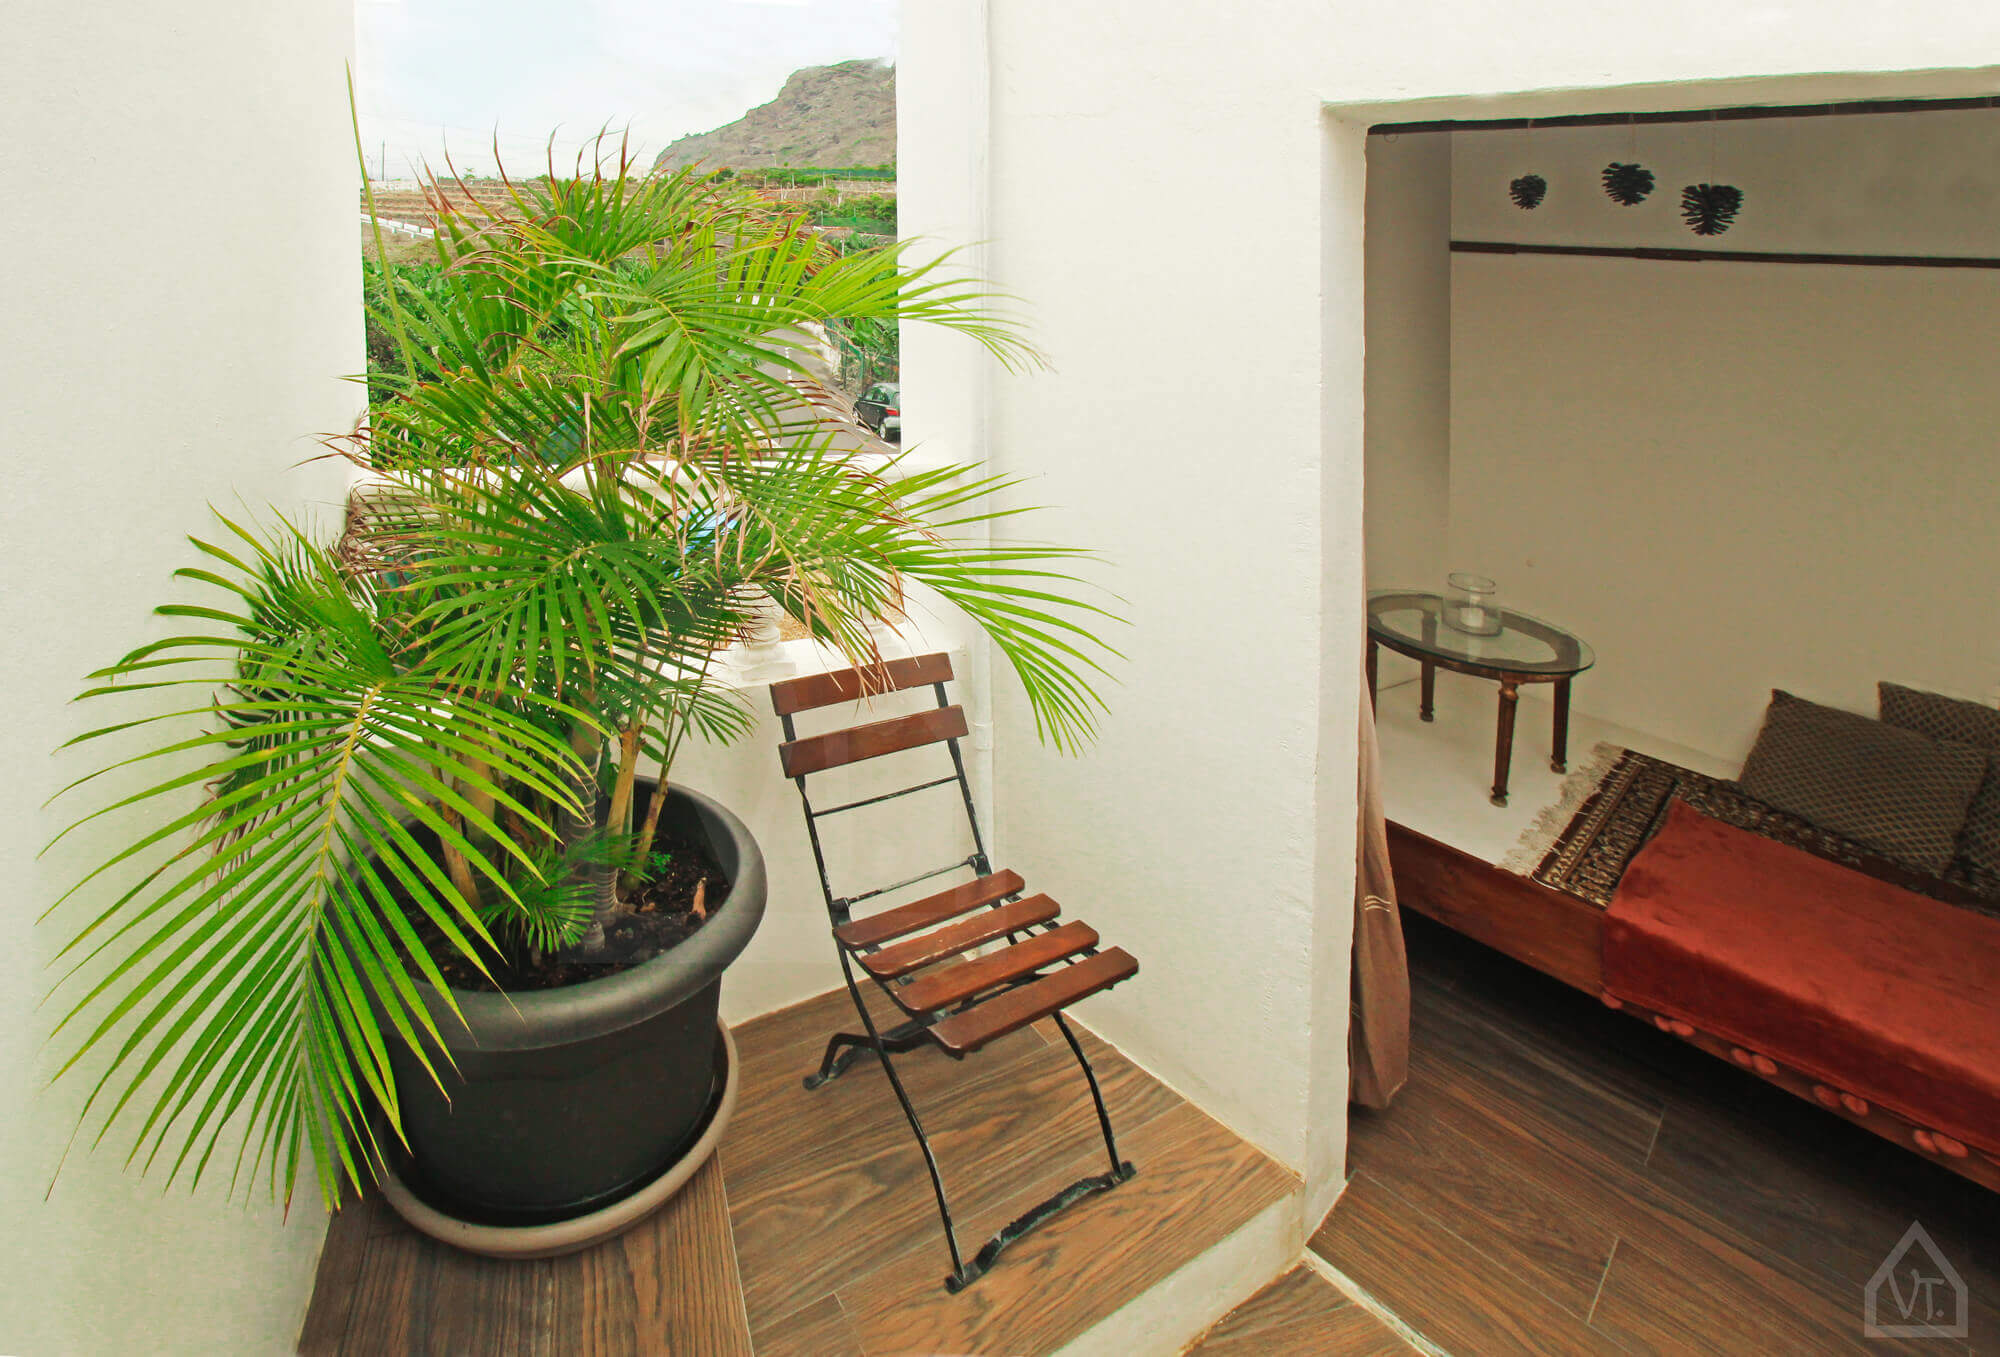 Aparment for rent in Tenerife - Terrace